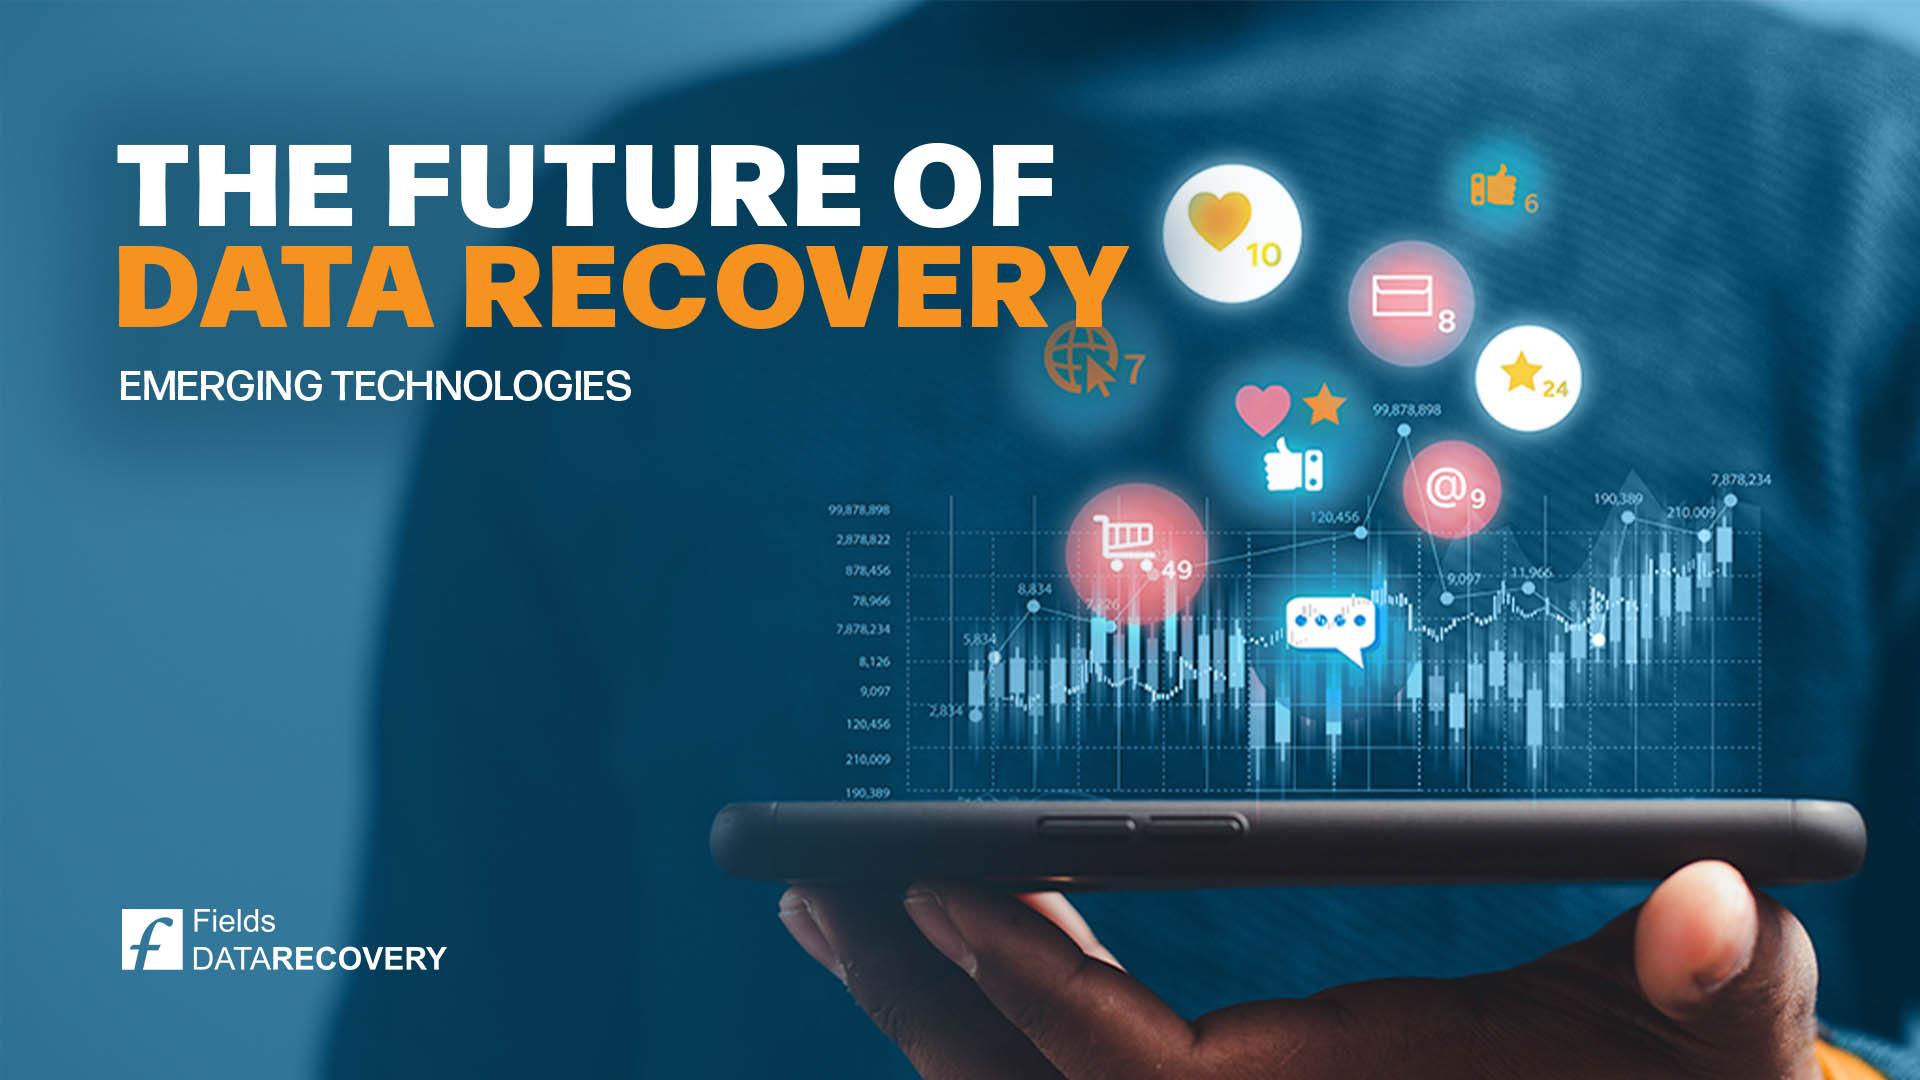 The Future of Data Recovery: Emerging Technologies